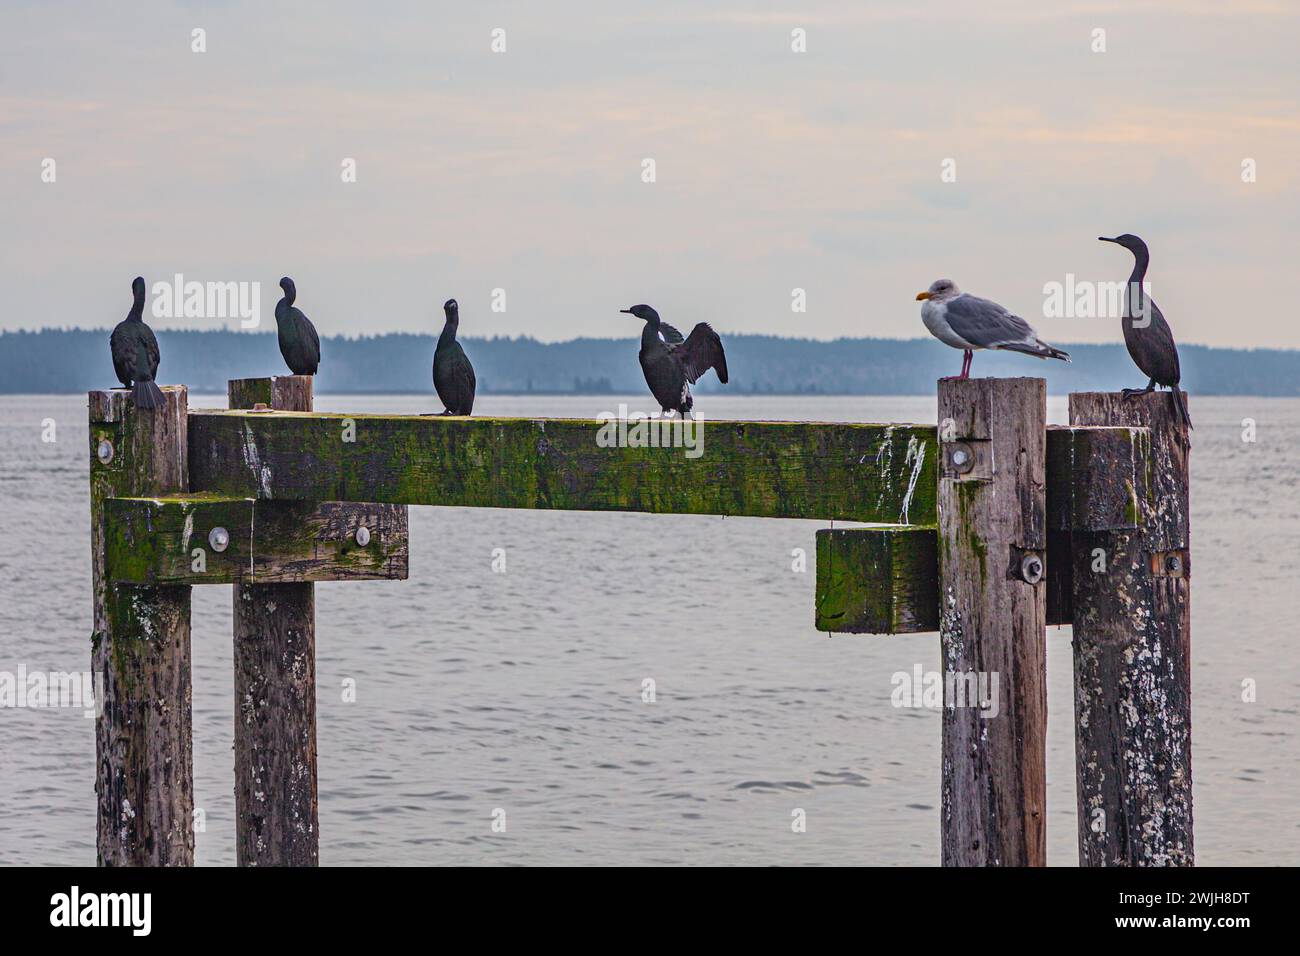 Cormorants and a seagull resting on wooden pilings in Sidney British Columbia Canada Stock Photo